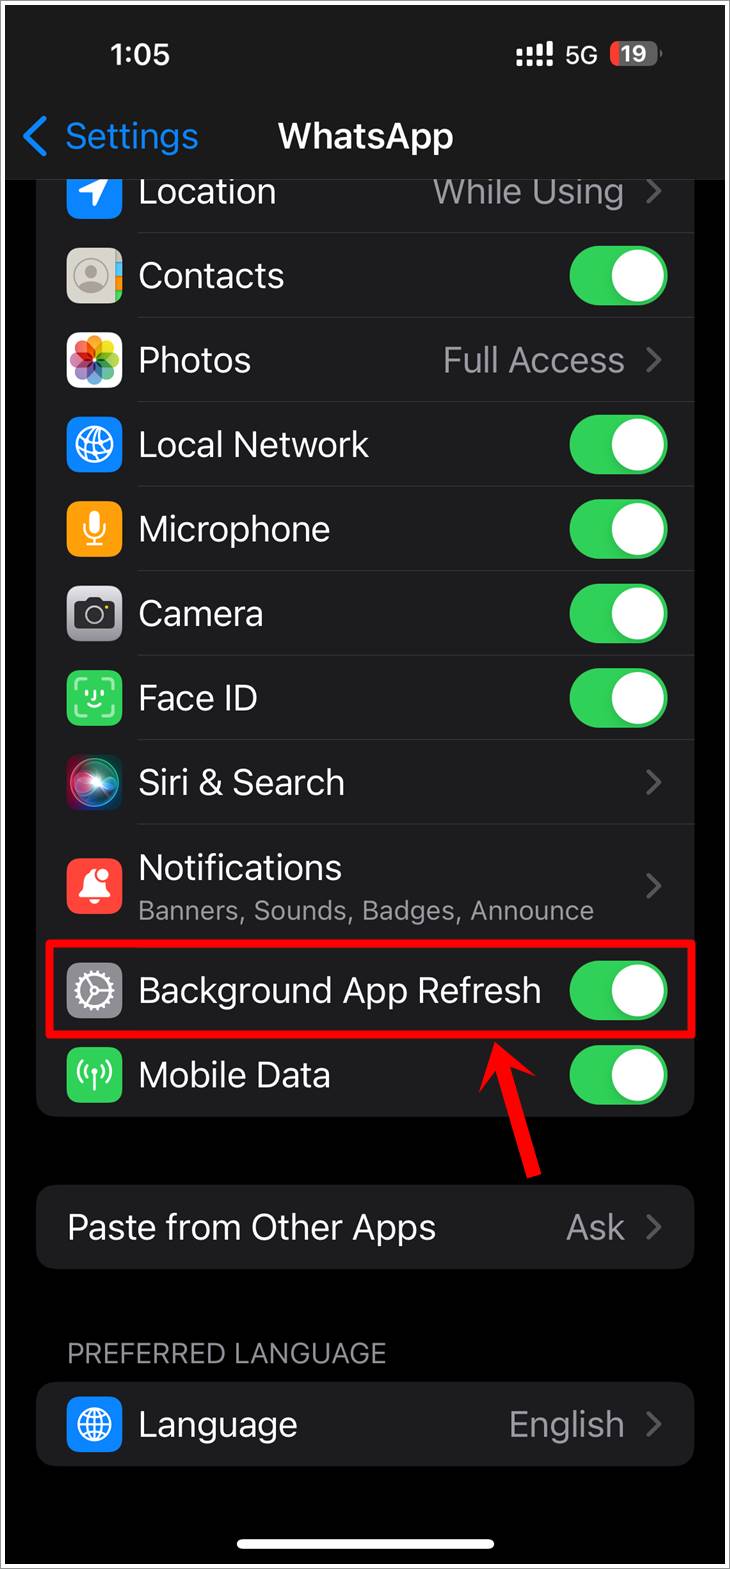 Fix WhatsApp Not Receiving Messages: This is a screenshot of the iPhone 'Settings' for WhatsApp. The 'Background App Refresh' option has been toggled on and highlighted.